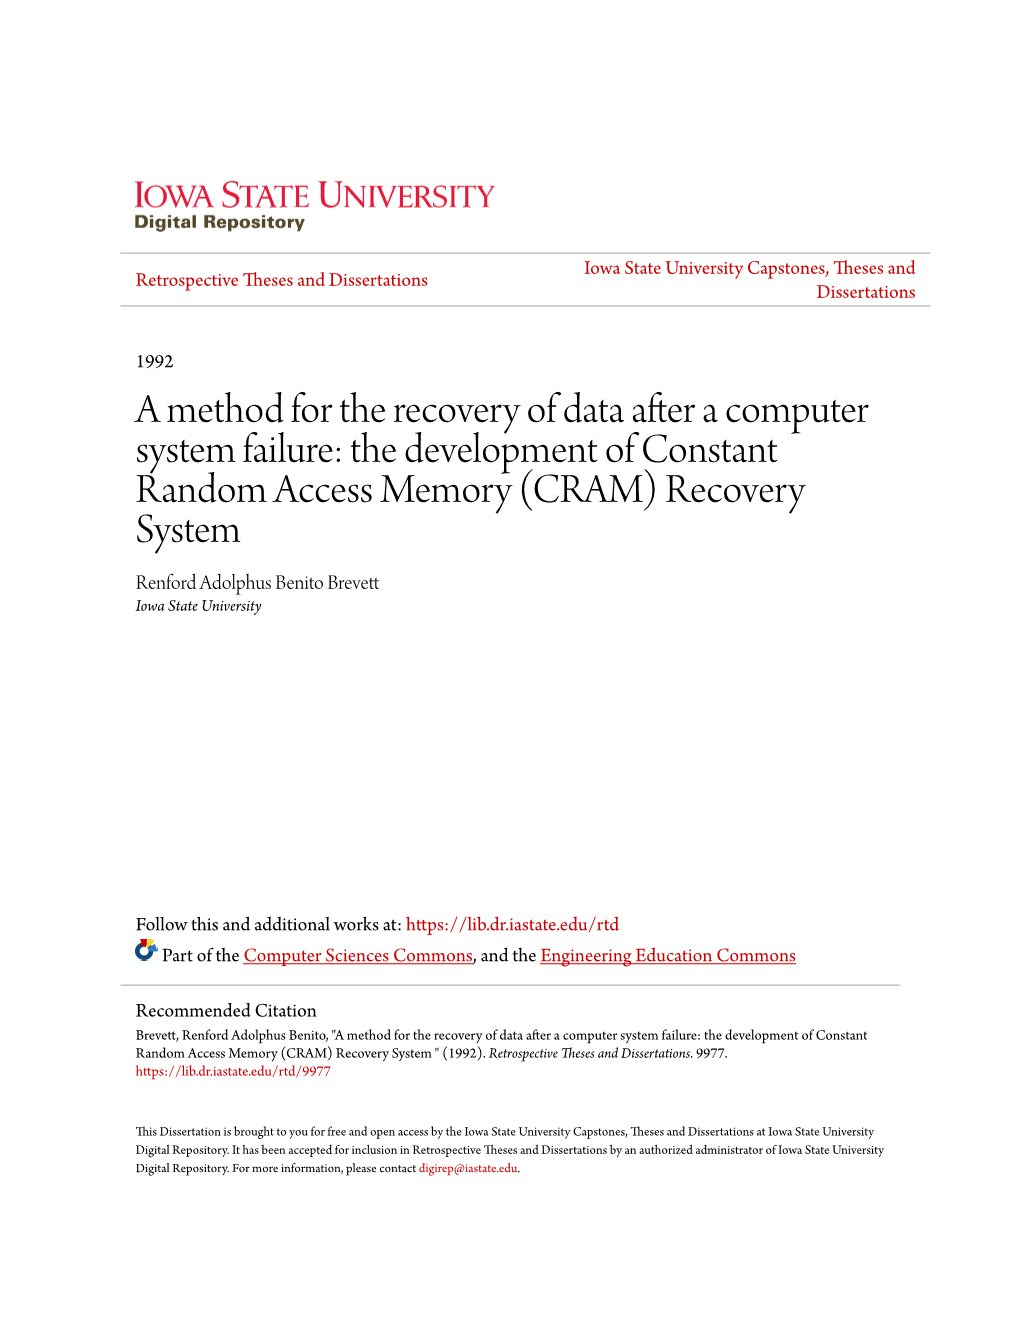 A Method for the Recovery of Data After a Computer System Failure: The